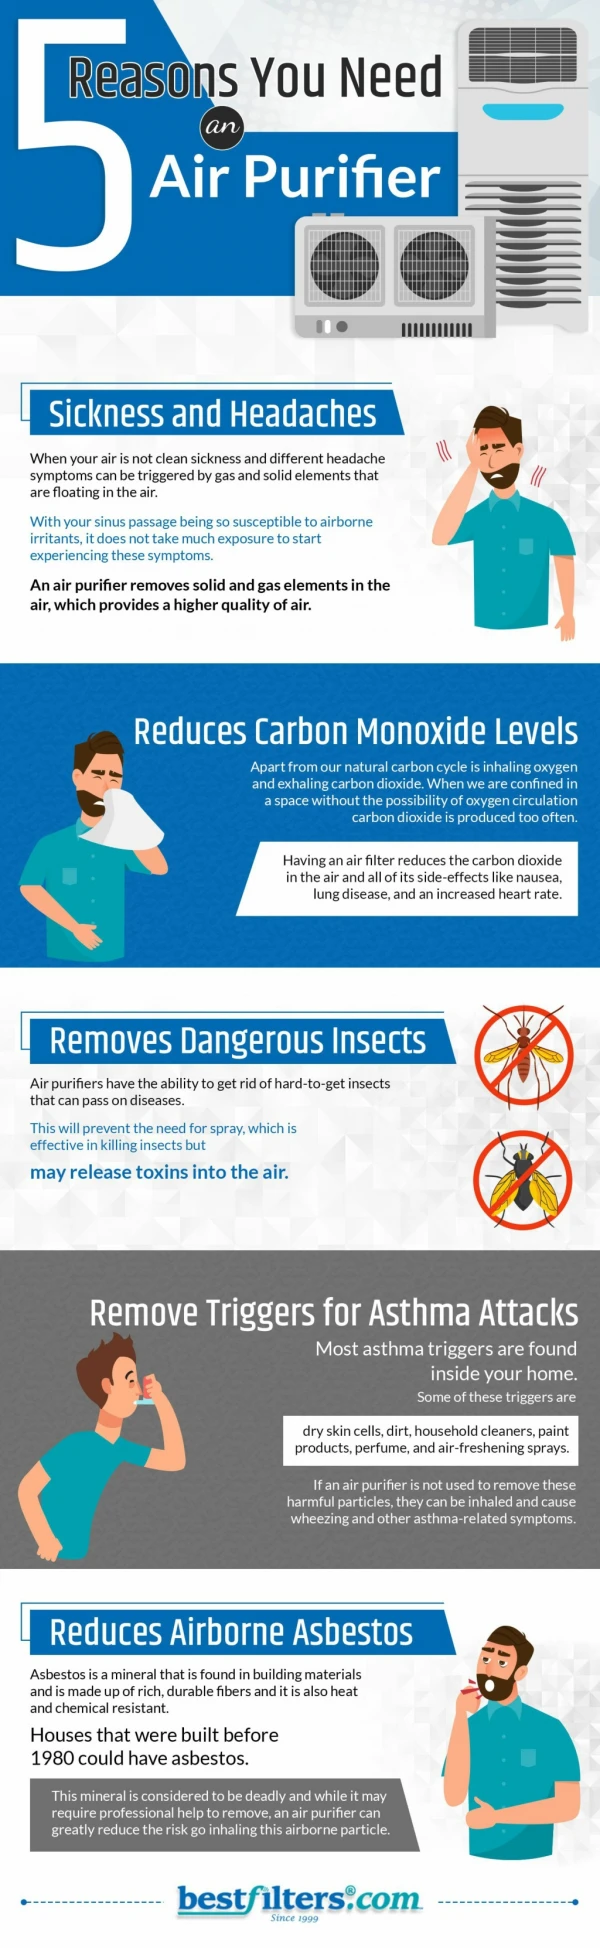 5 Reasons You Need An Air Purifier [Infographic]